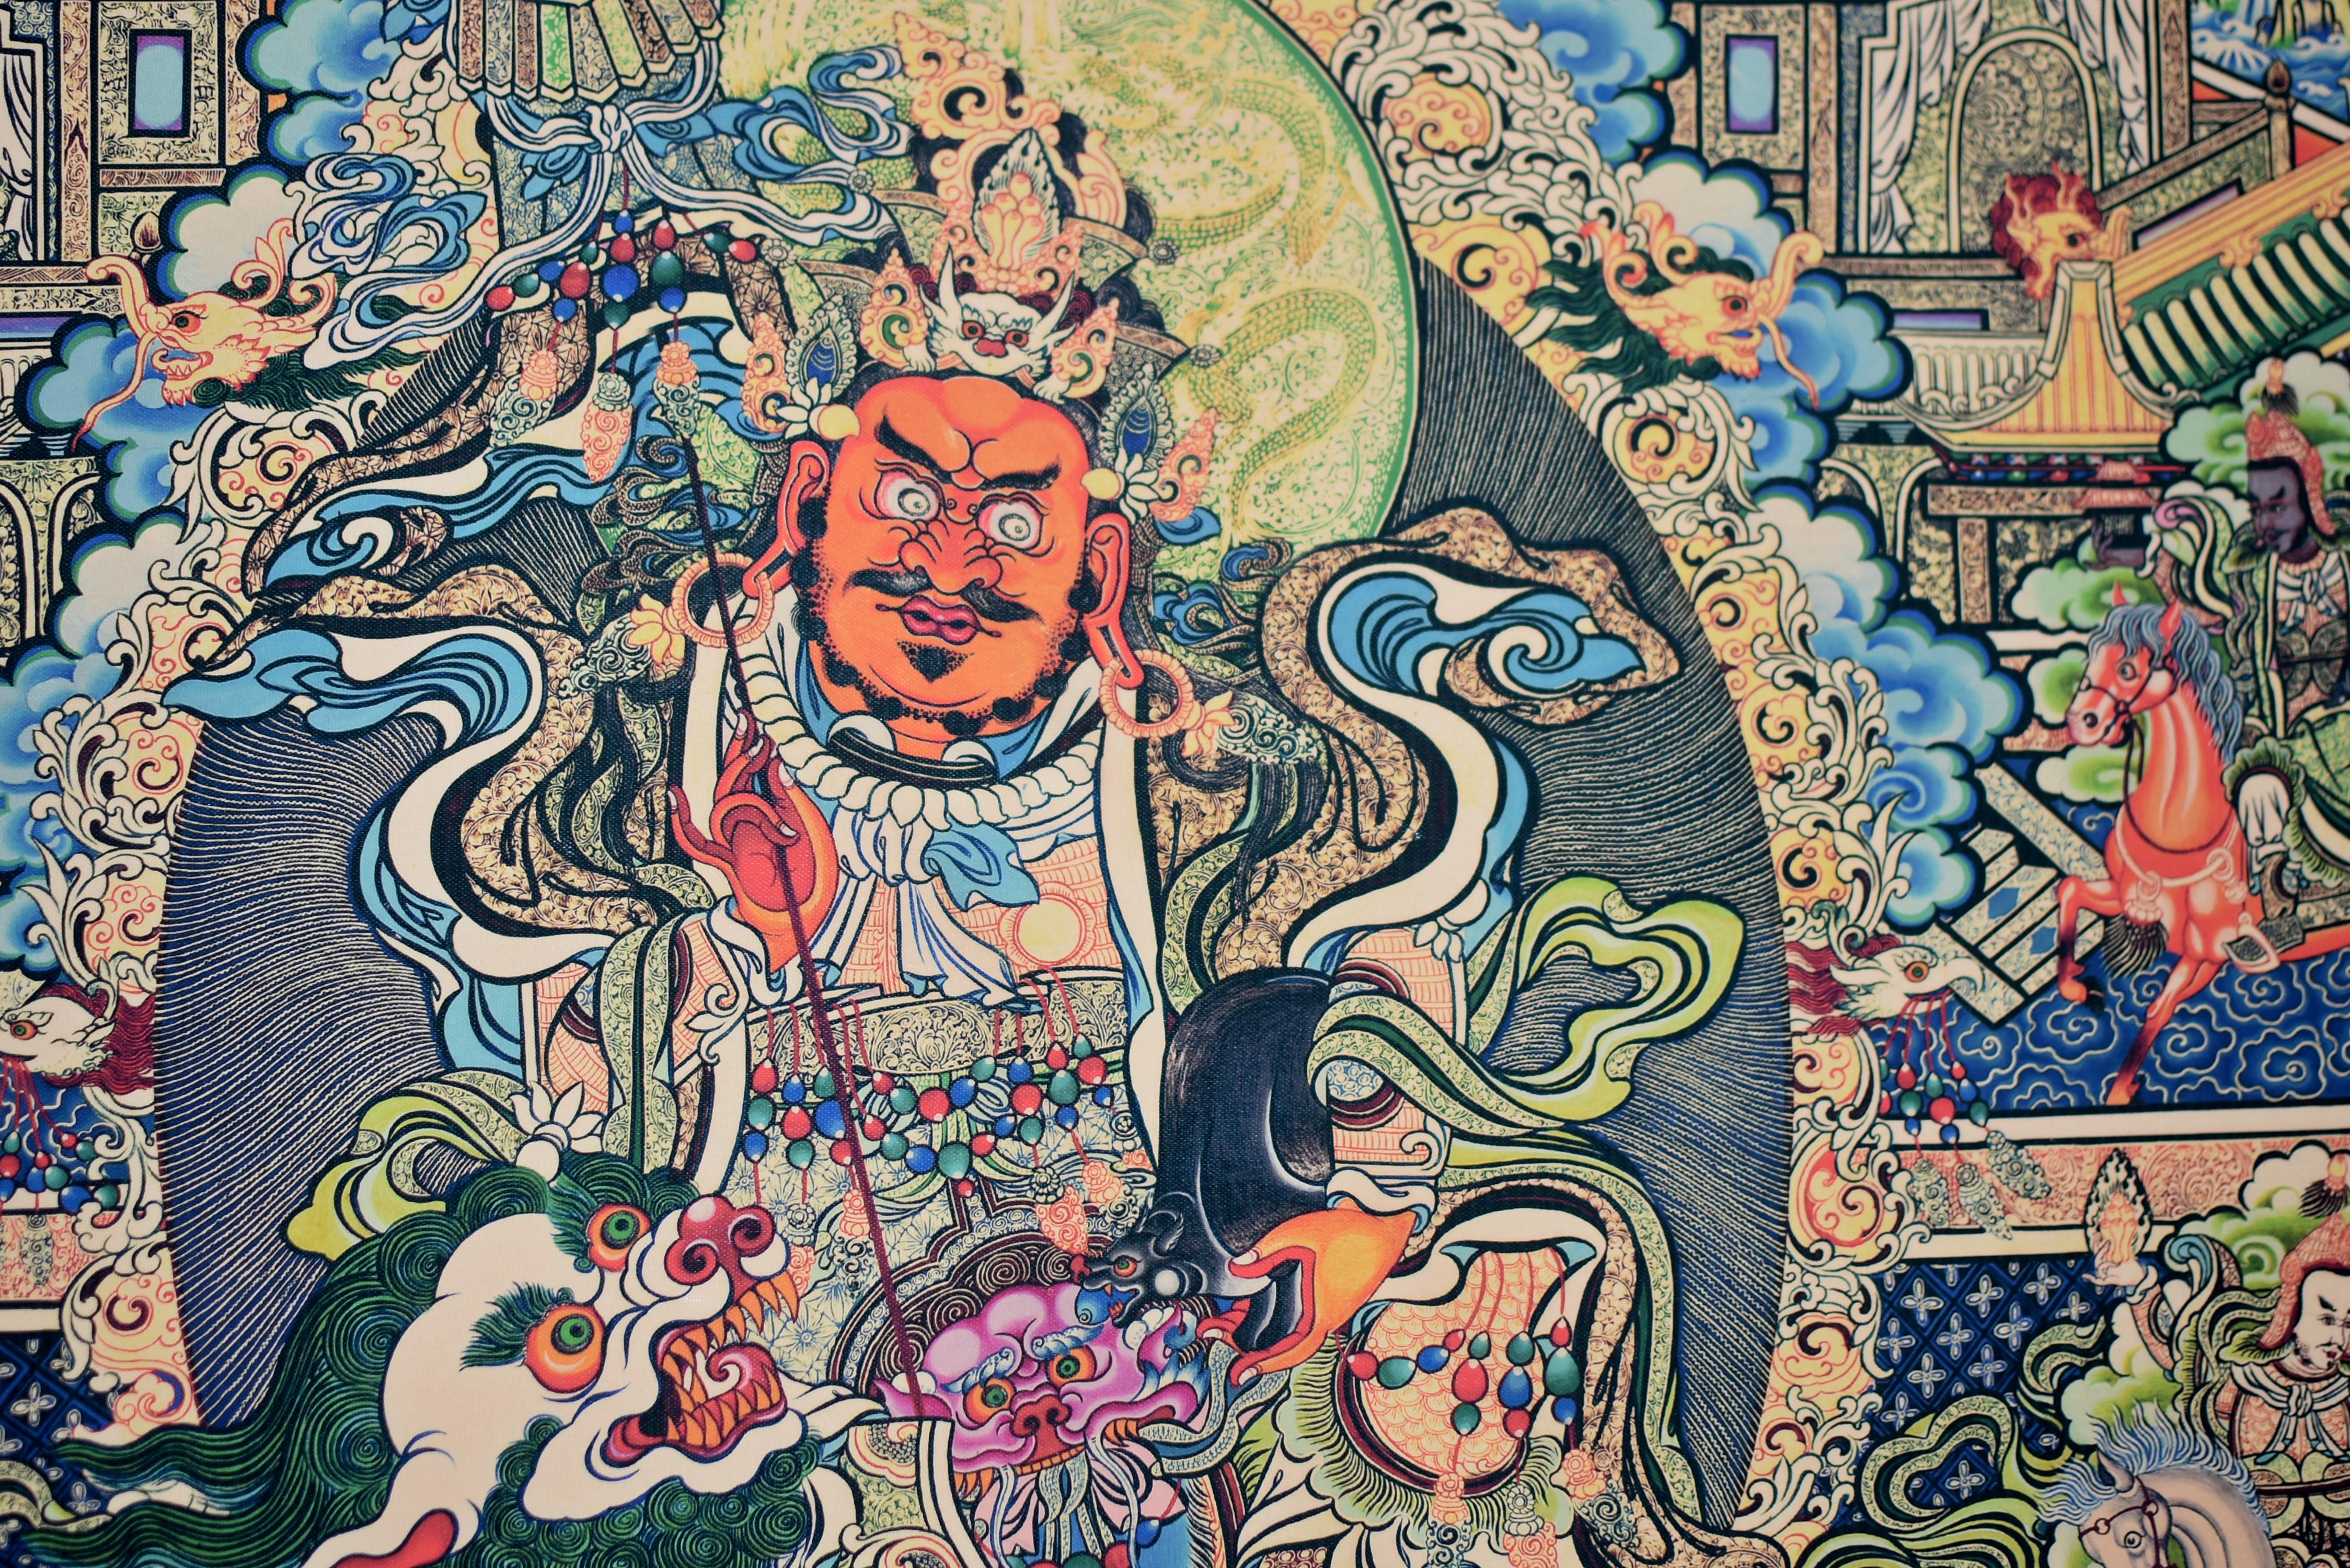 A superbly detailed Thangka print depicting the protective Tibetan God Dorje Drolo whose ferocious expression subdues negative and demonic forces. Riding on white lion above a lotus throne, he is backed by the heavenly temple with its garden in full